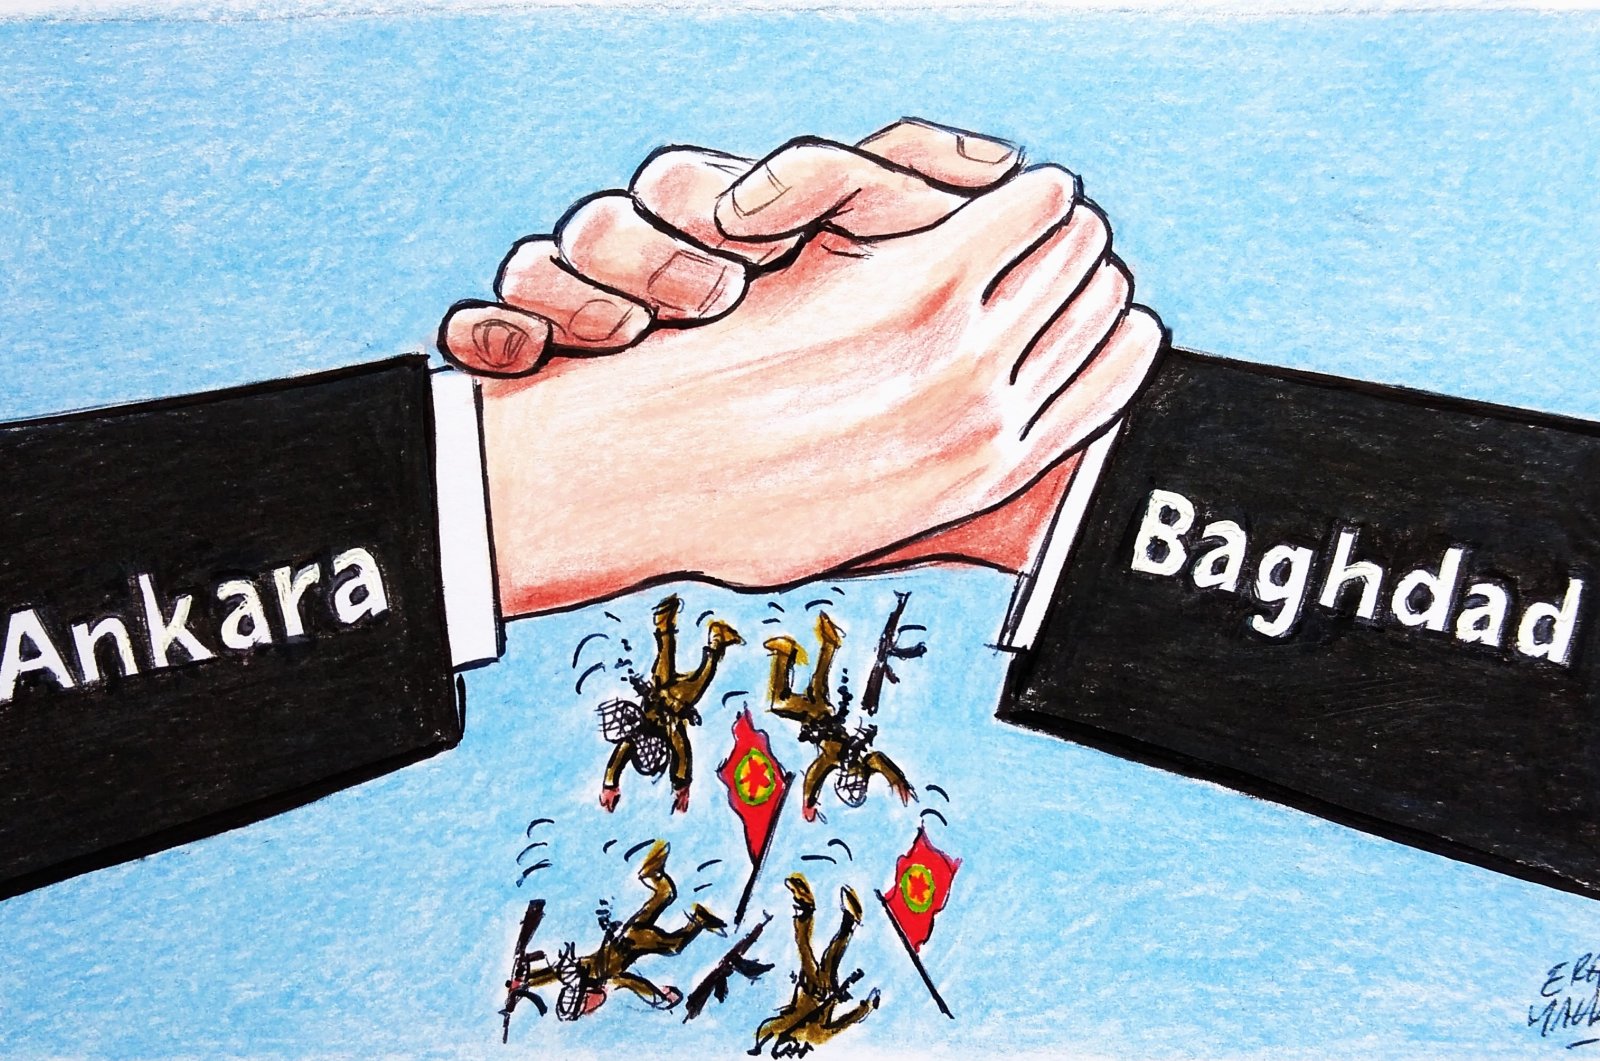 &quot;Ankara has been in contact with Baghdad for many years regarding the fight against PKK and the two countries shook hands more than once in the past – which begs the question of why the most recent agreement should be considered the beginning of a new chapter in the counter-PKK campaign and bilateral partnerships.&quot; (Illustration by Erhan Yalvaç)